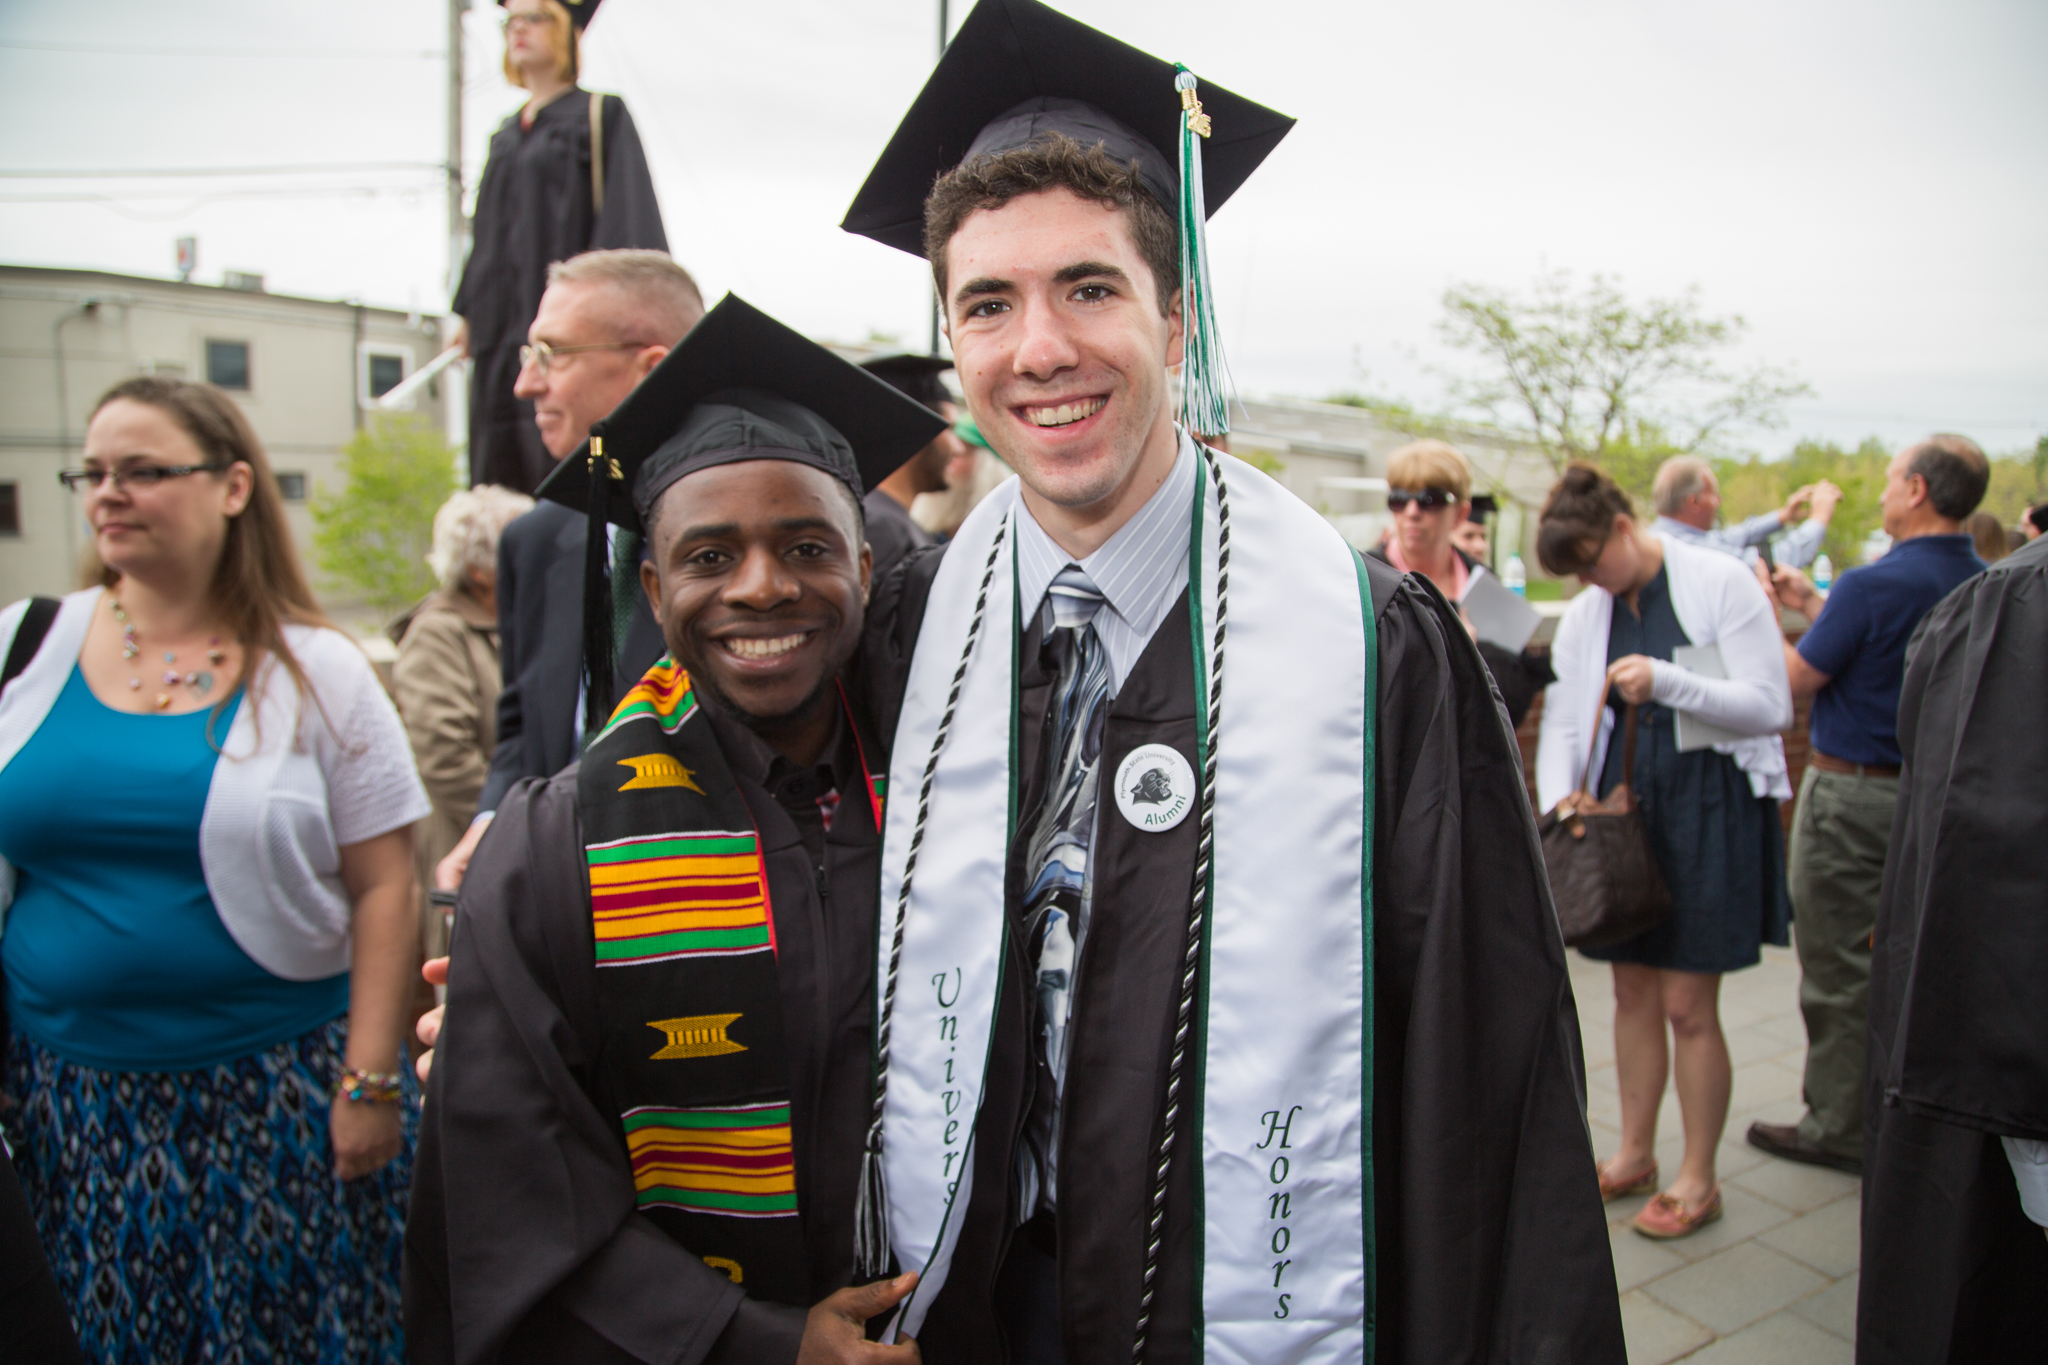 Graduates were all smiles at the 144th Commencement ceremony. Kaleb Hart ’11 photo.